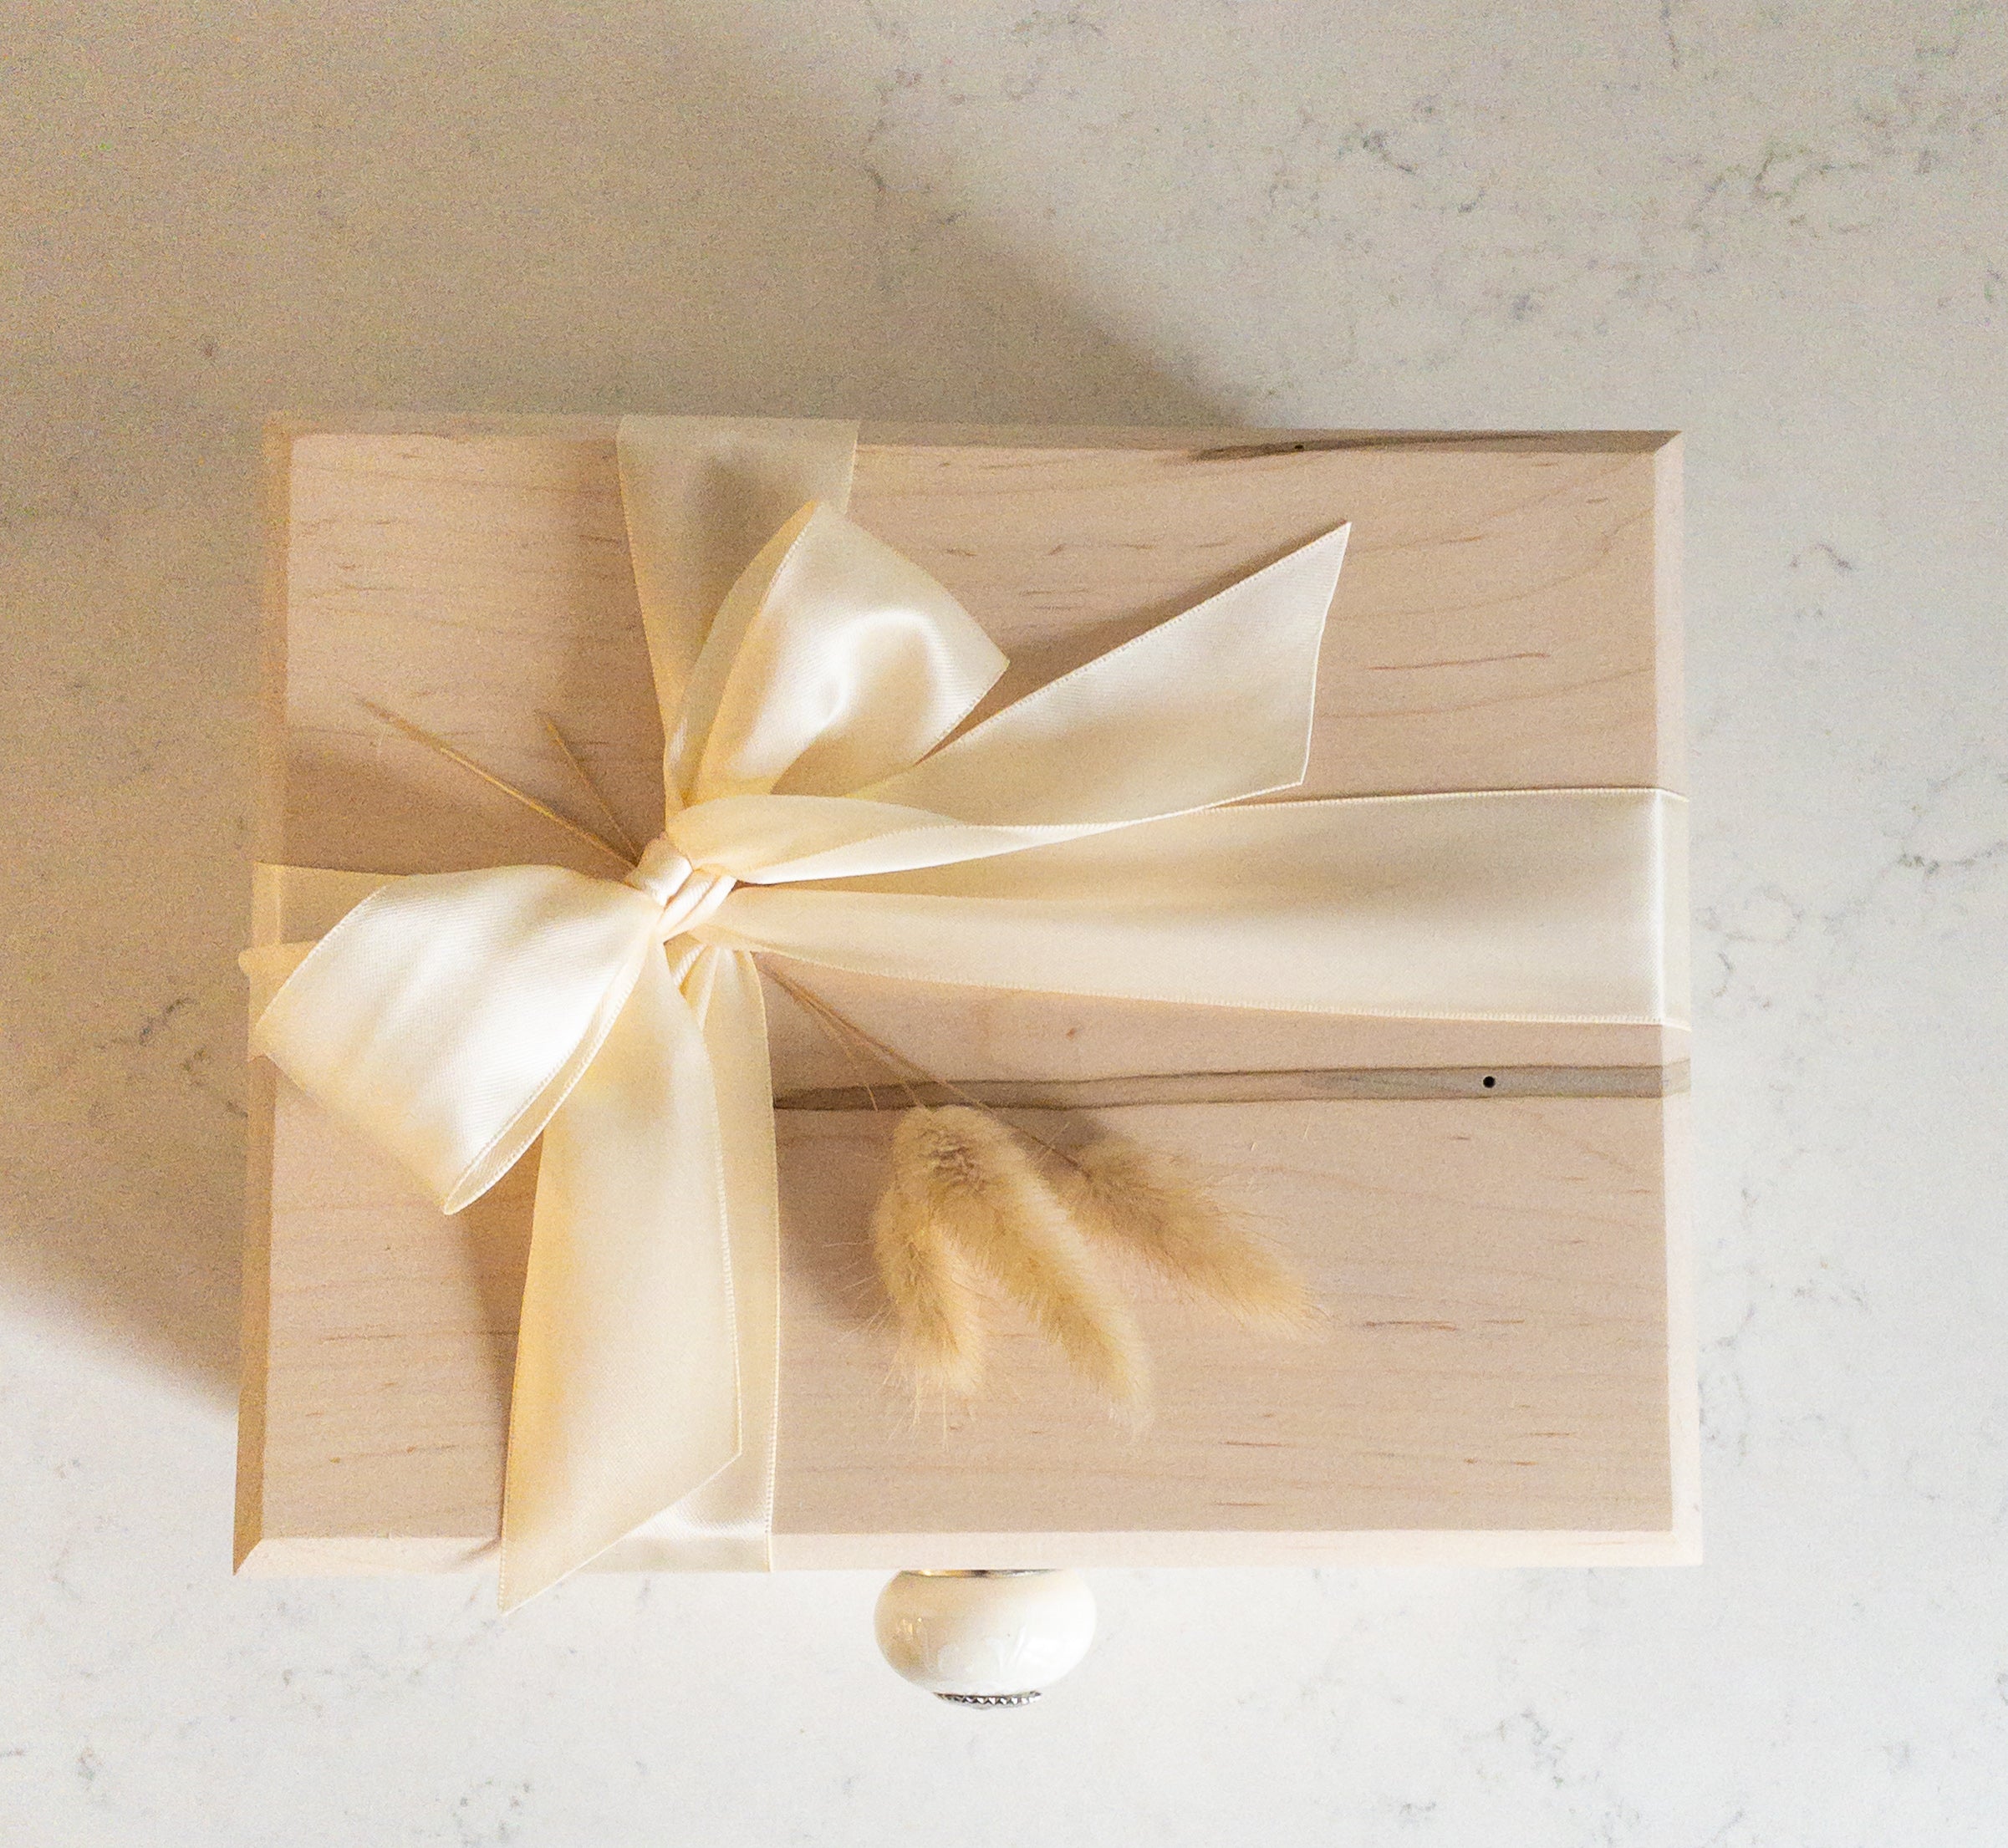 Reshamm® Designer gift boxes for presents made of Wooden MDF box for gift  with neatly